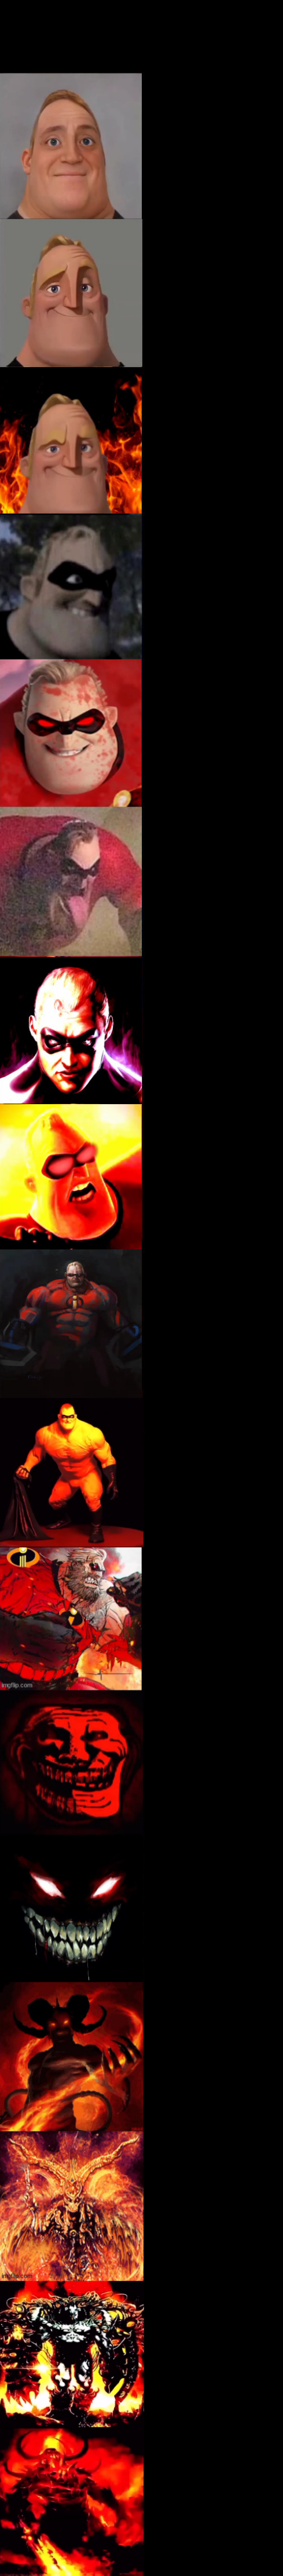 Mr. Incredible Becoming Evil Very Extended Blank Meme Template